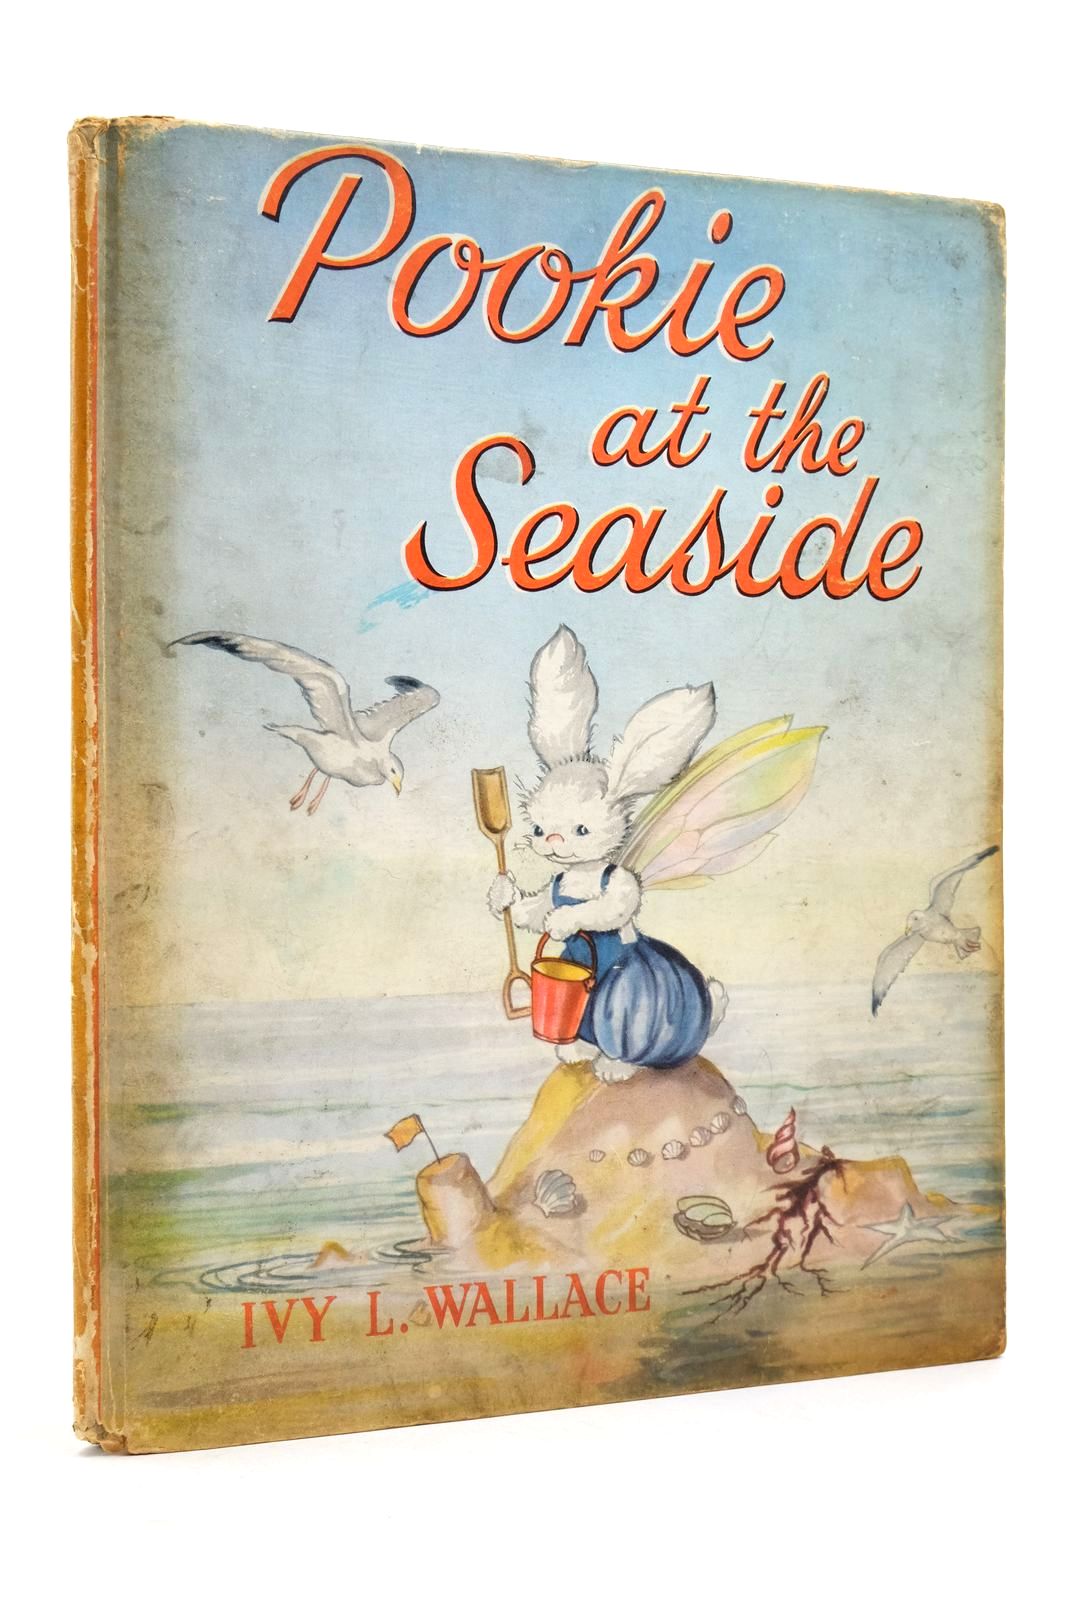 Photo of POOKIE AT THE SEASIDE written by Wallace, Ivy L. illustrated by Wallace, Ivy L. published by Collins (STOCK CODE: 2138894)  for sale by Stella & Rose's Books